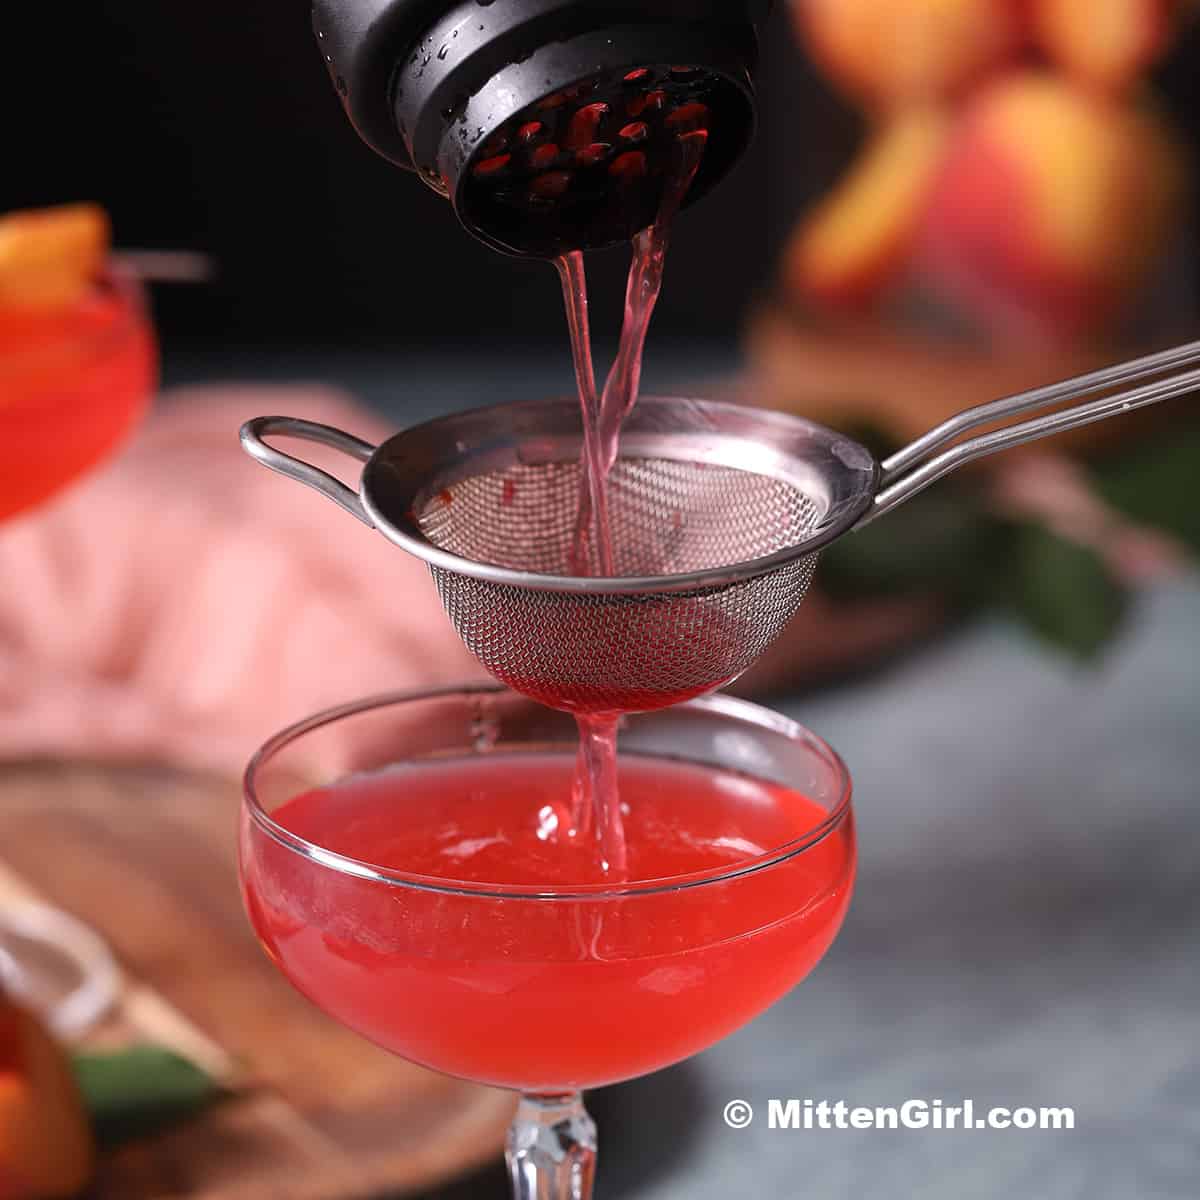 Raspberry Peach Martini being poured through a strainer into a cocktail glass.